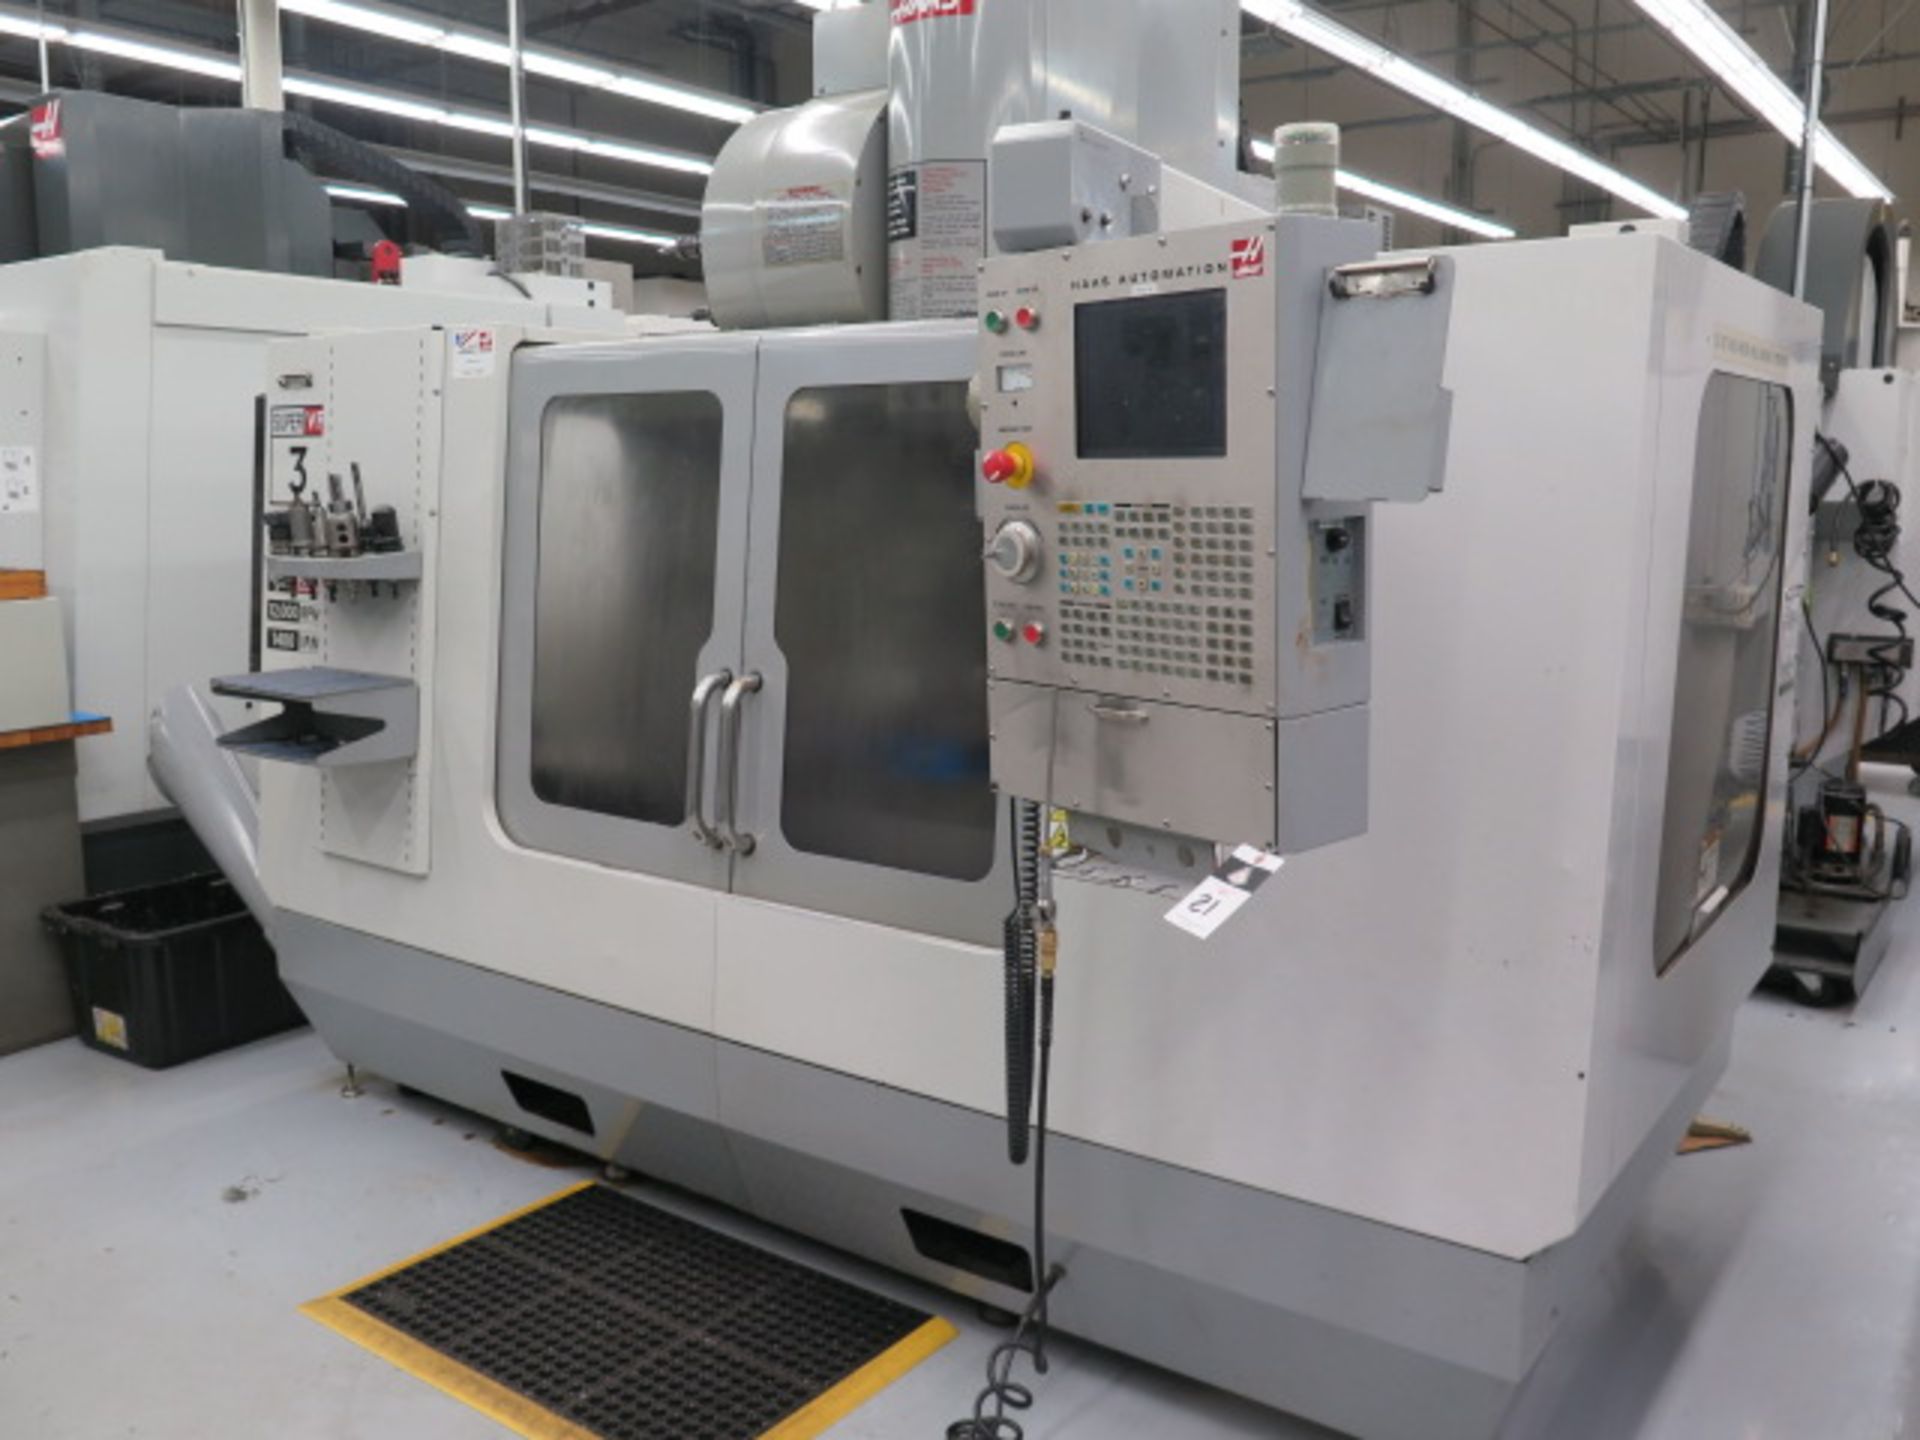 2006 Haas VF-3SS 4-Axis CNC VMC s/n 48615 w/ Haas Controls, 24-Station Side, SOLD AS IS - Image 2 of 17